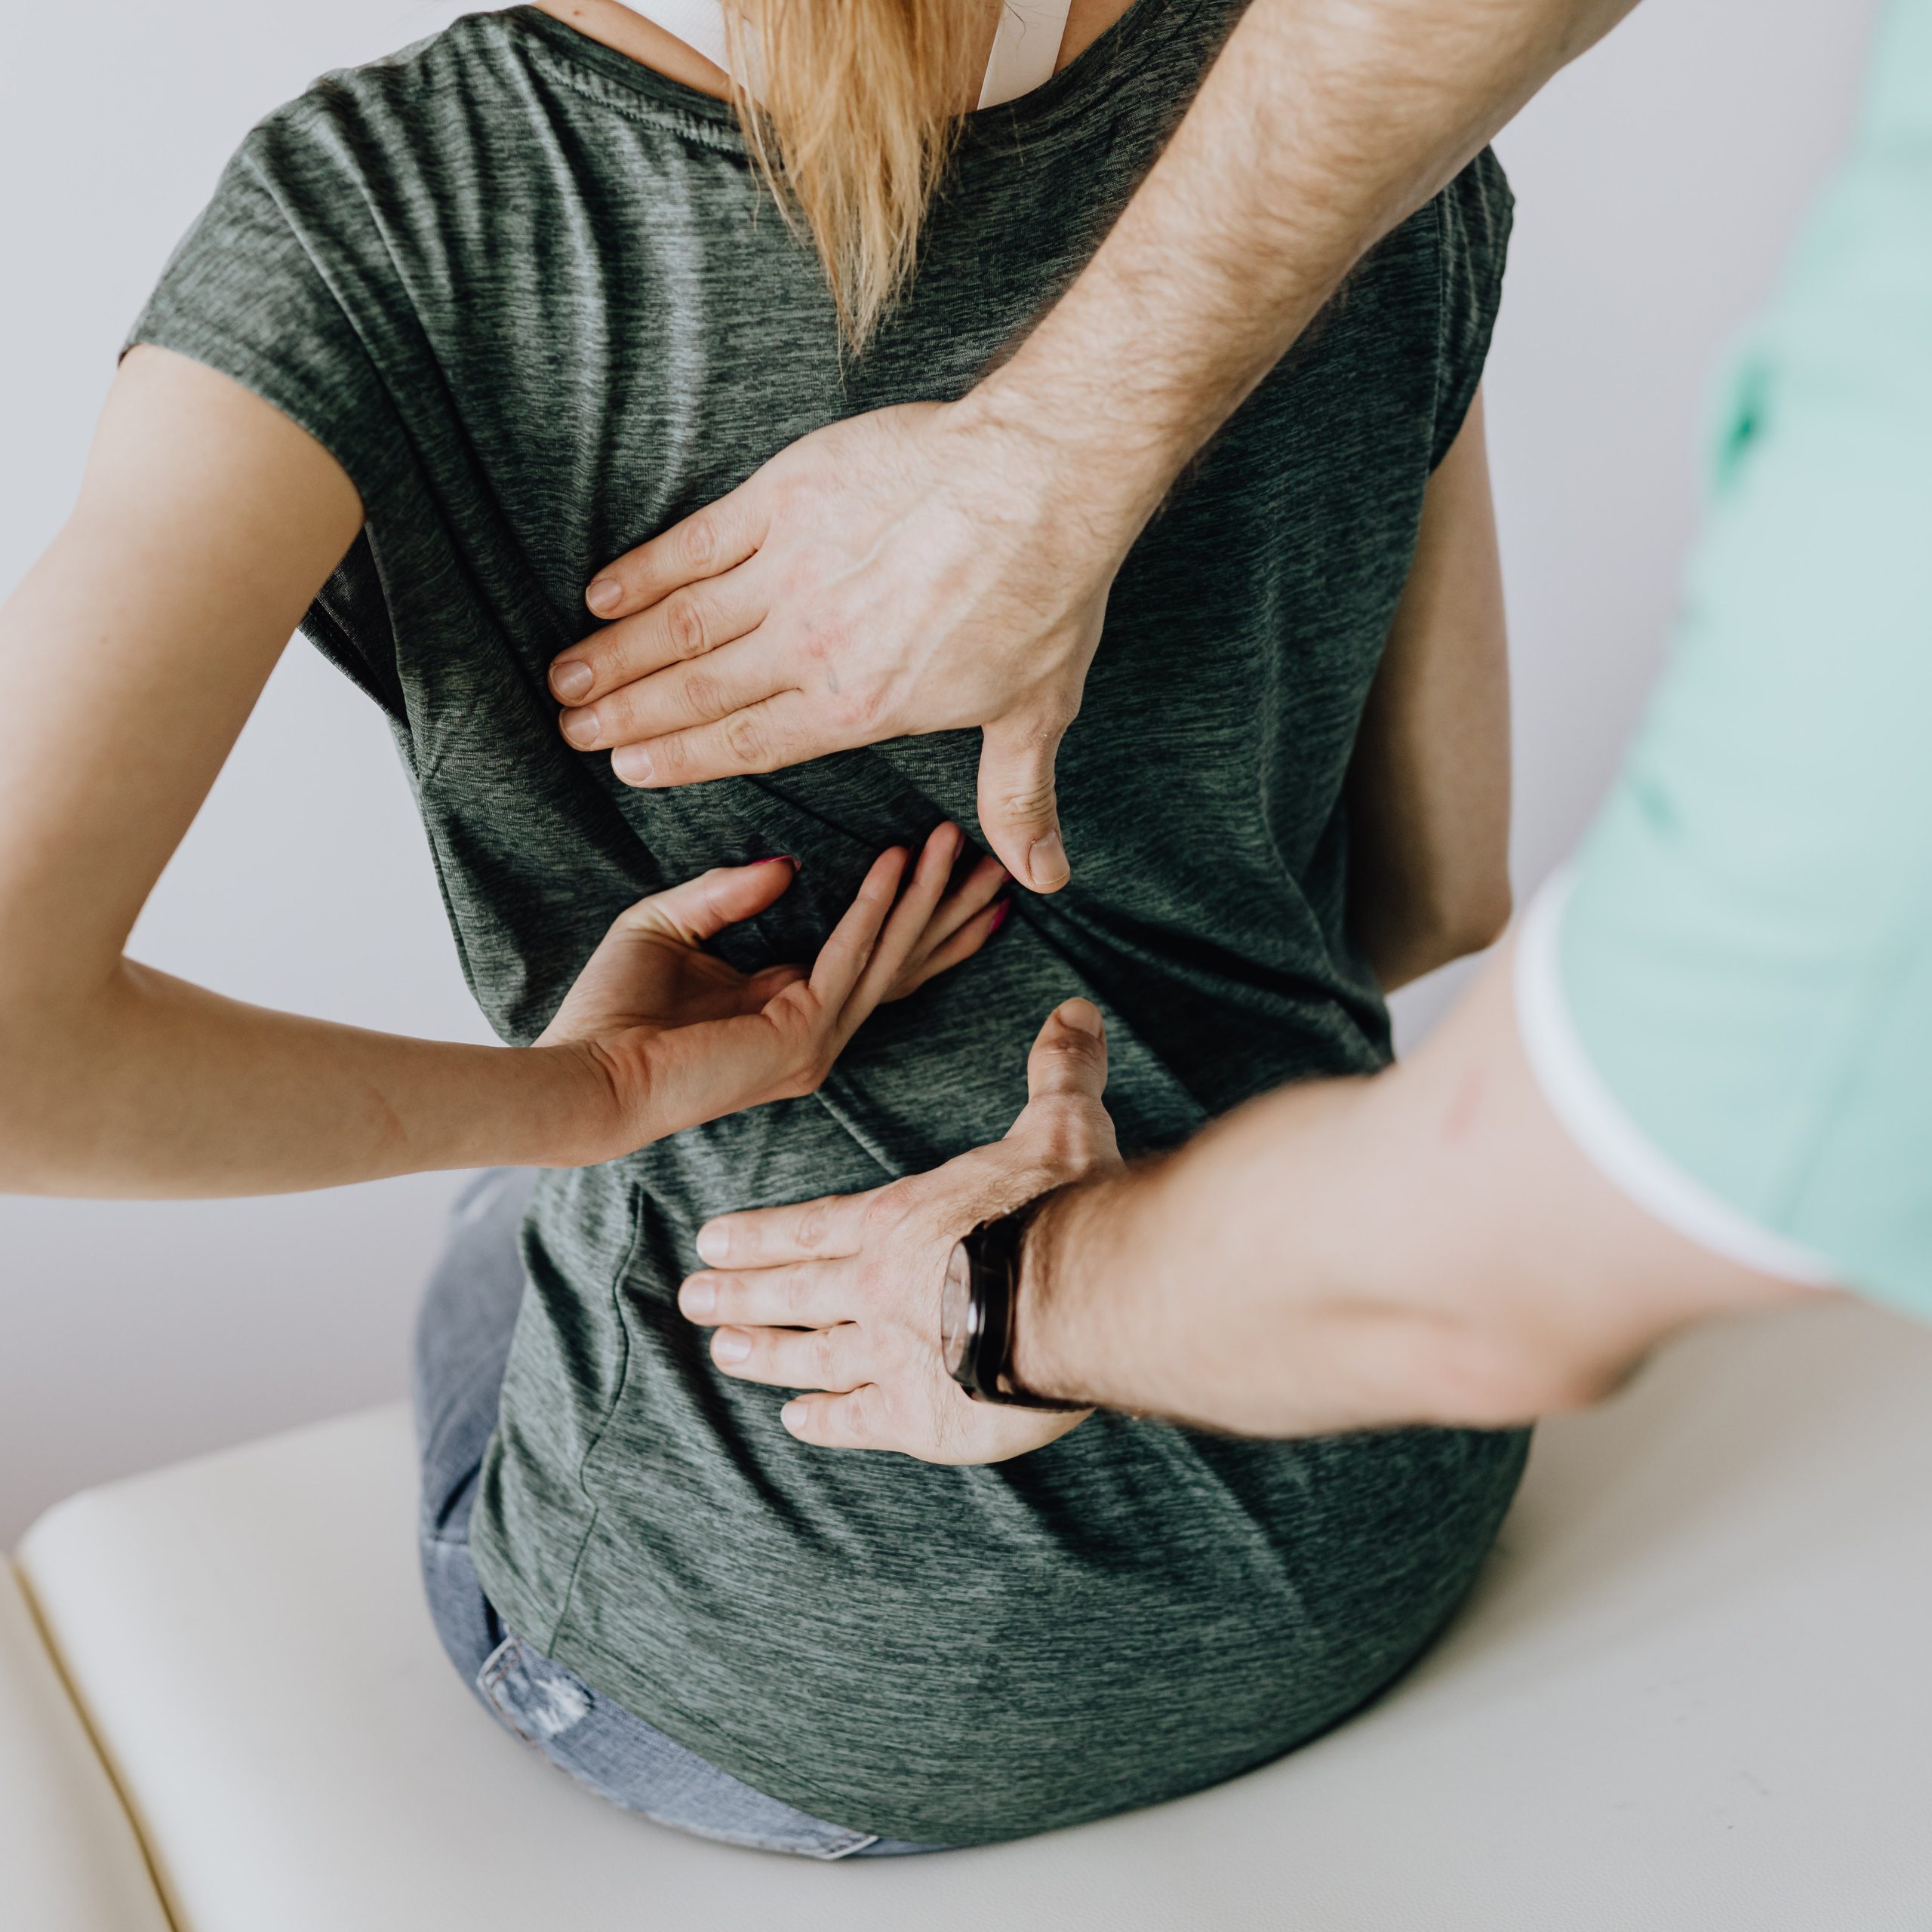 Physiotherapy for Lower Back Pain 